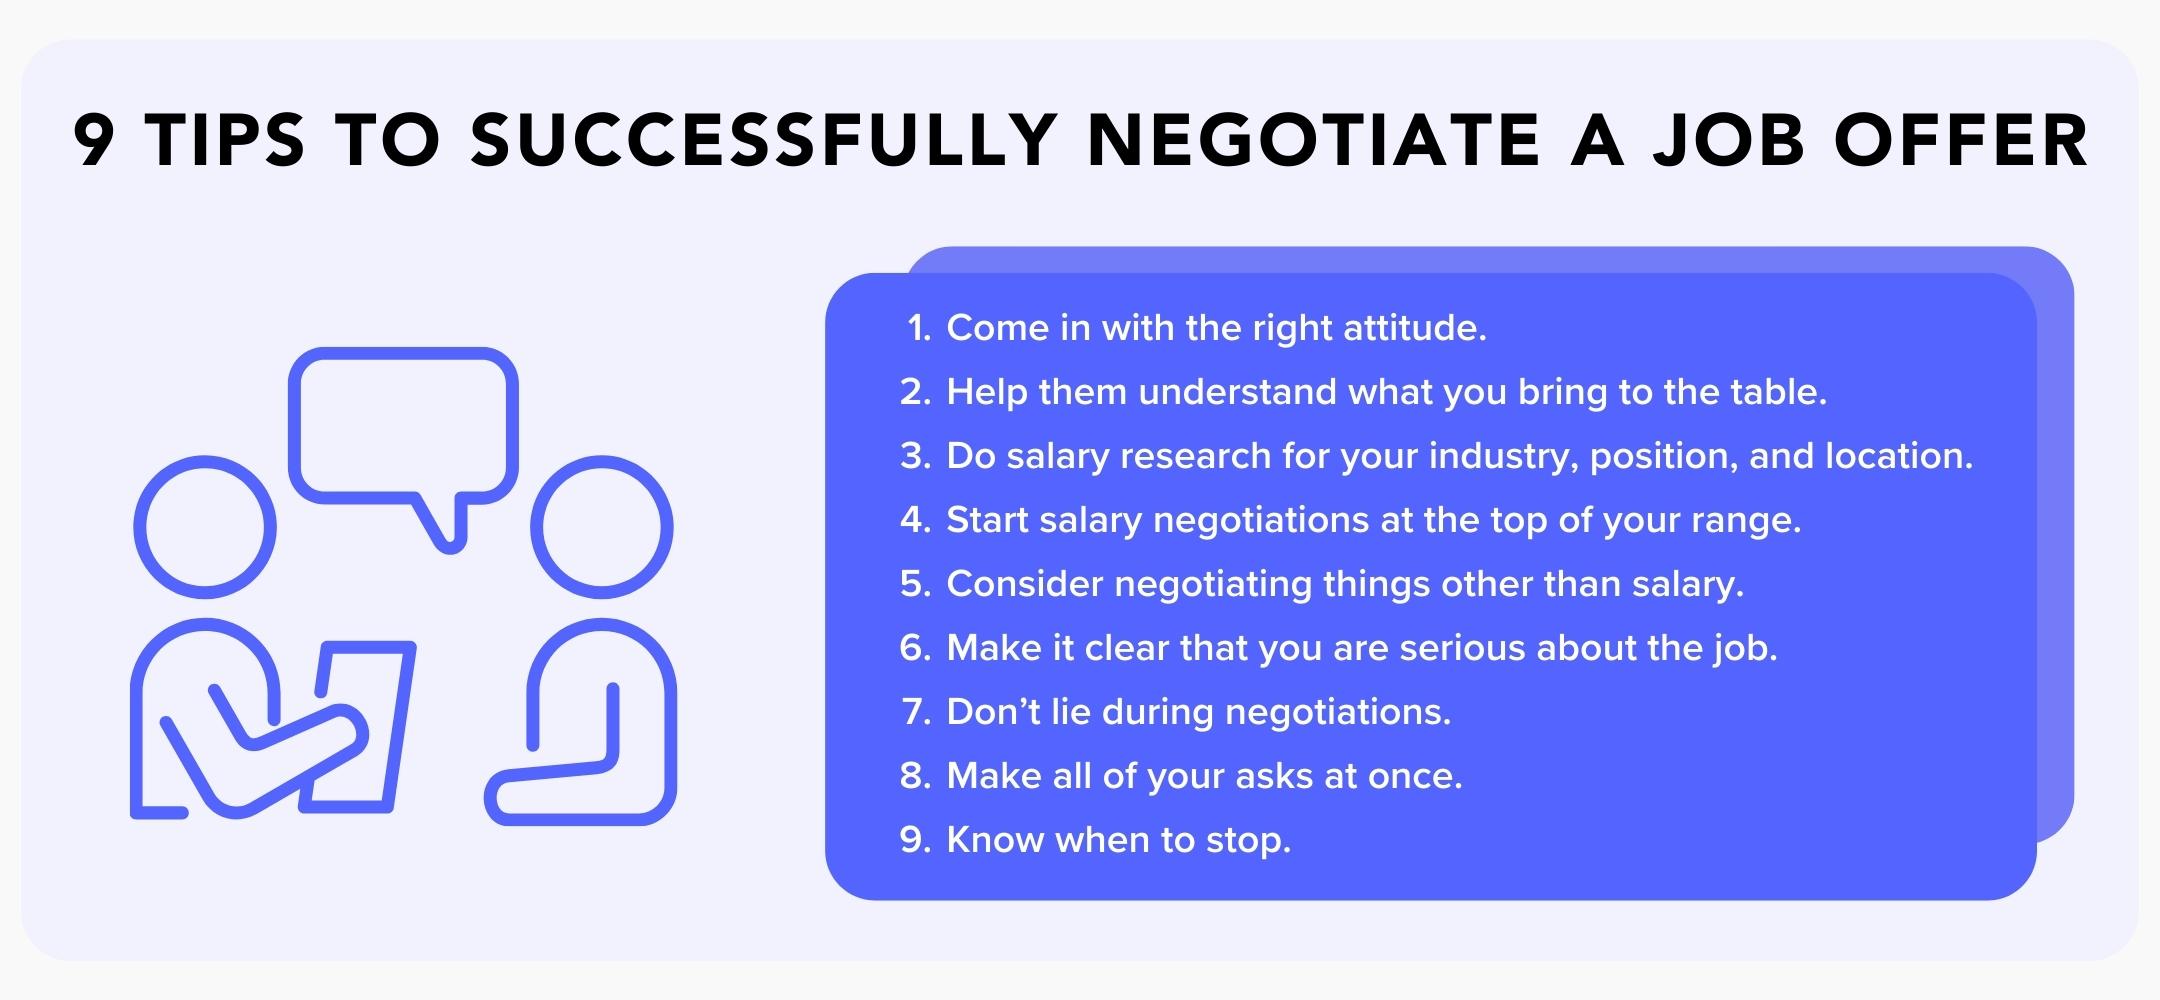 tips to successfully negotiate job offer